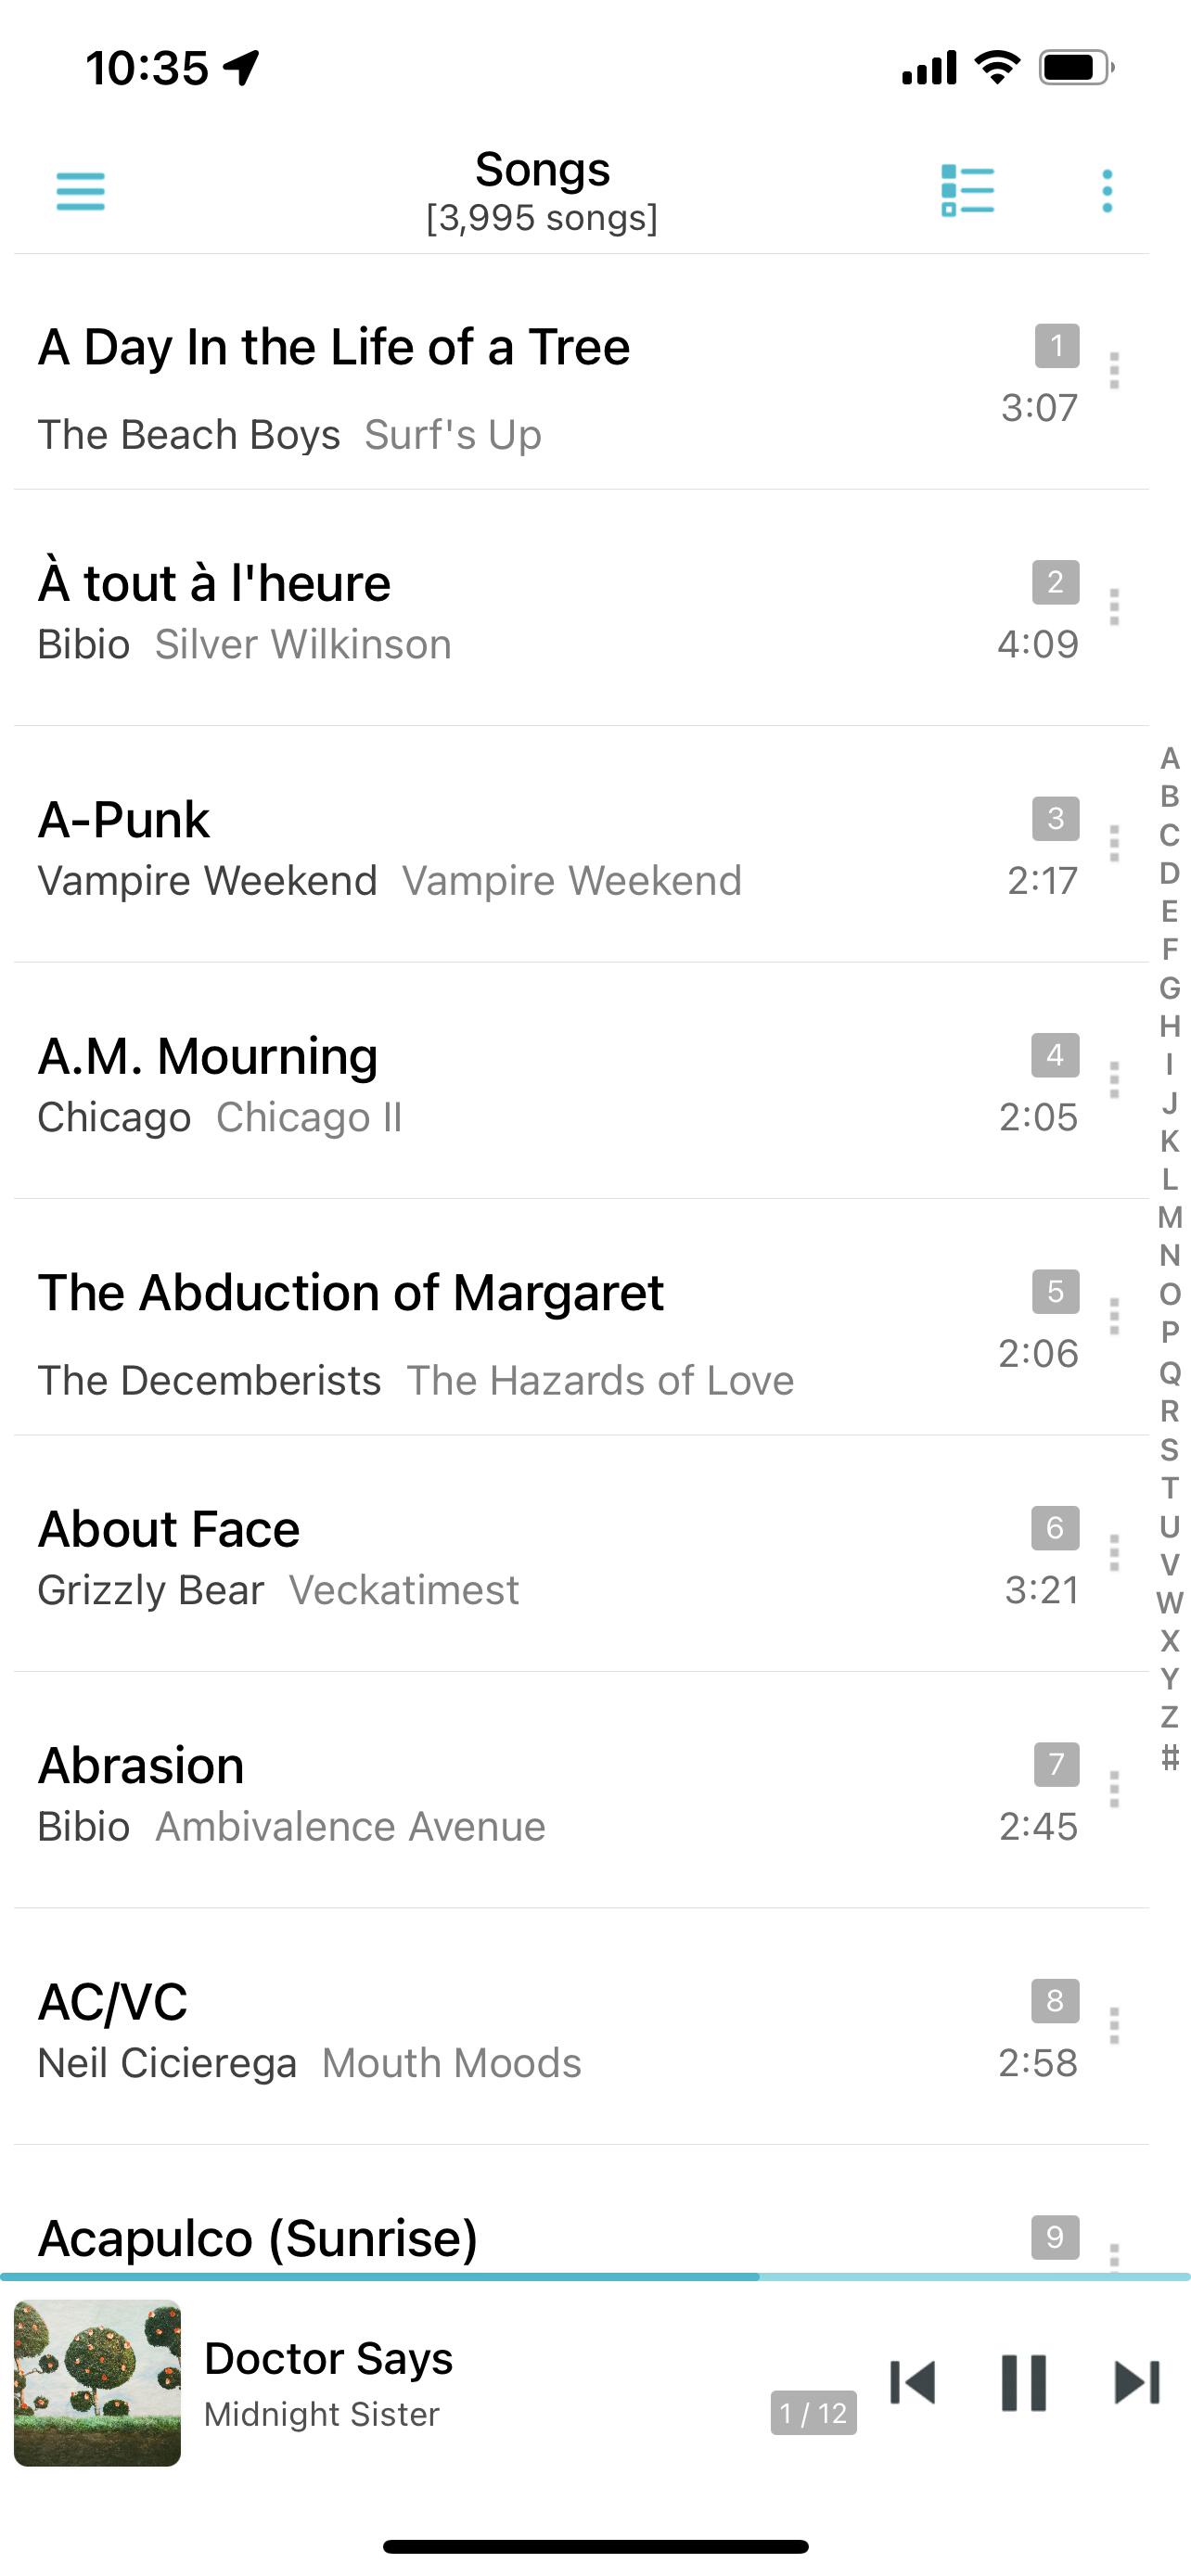 Image of my jetAudio Songs page in light mode